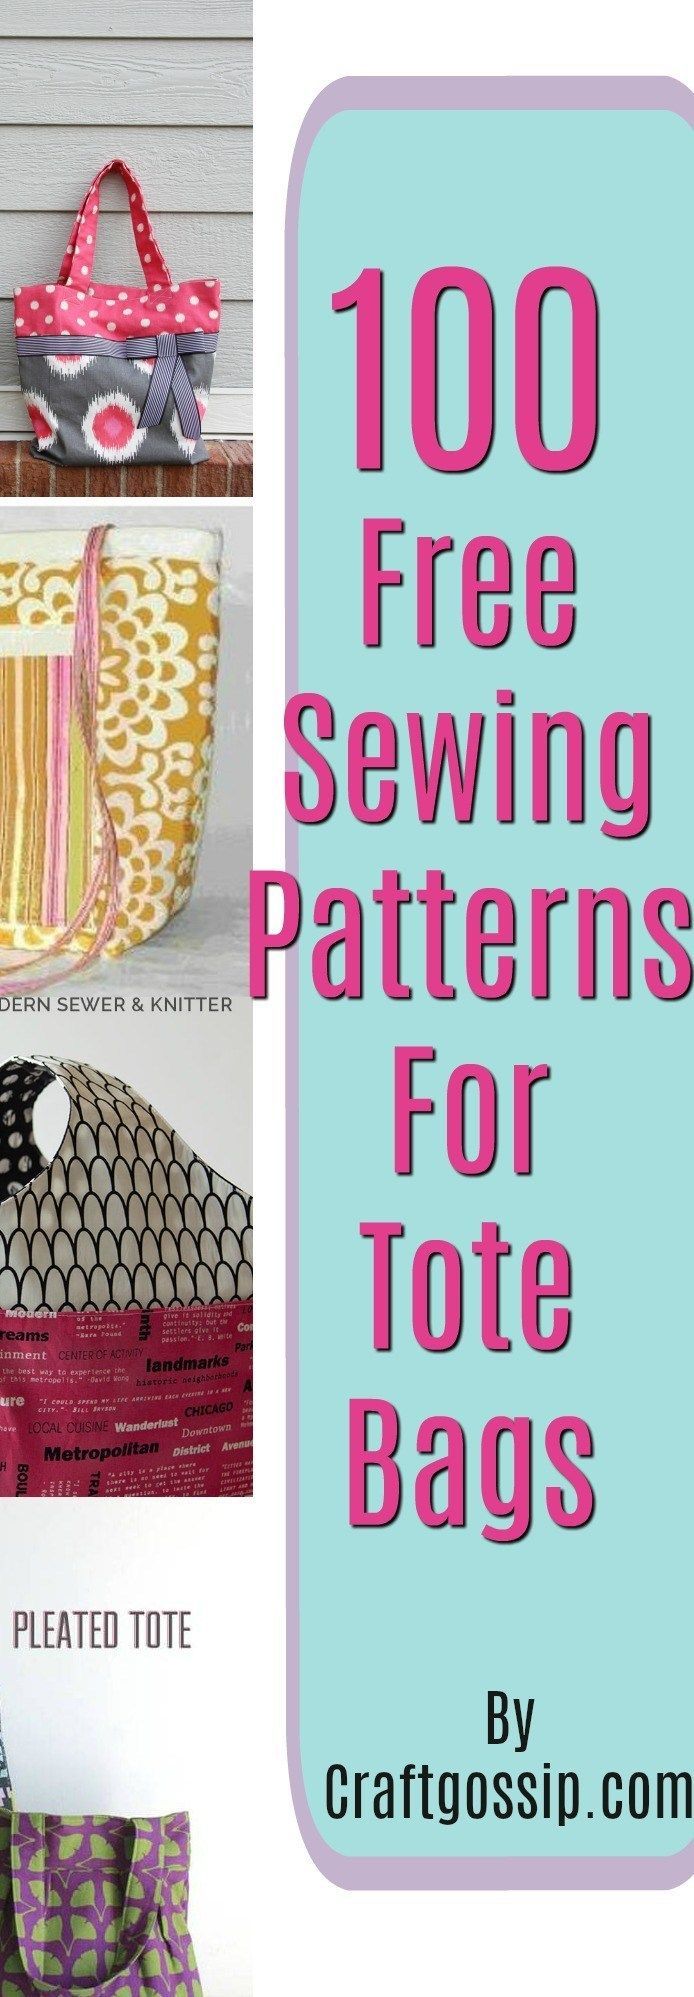 100 Sewing Patterns – Tote Bags -   12 diy projects Sewing tote bags ideas